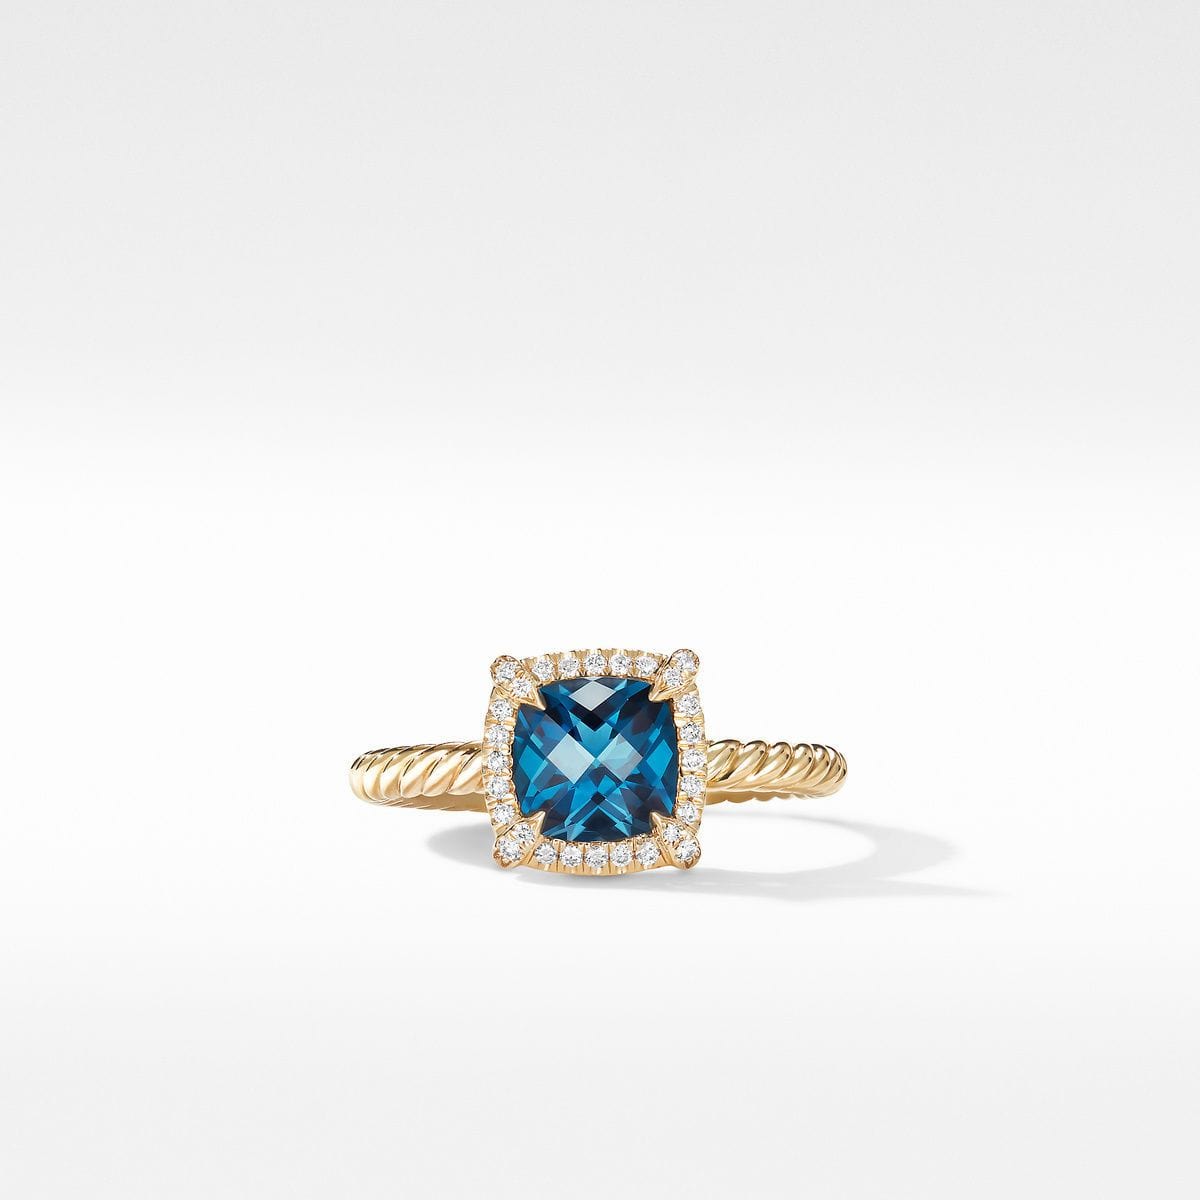 Petite Chatelaine® Pavé Bezel Ring in 18K Yellow Gold with Hampton Blue Topaz